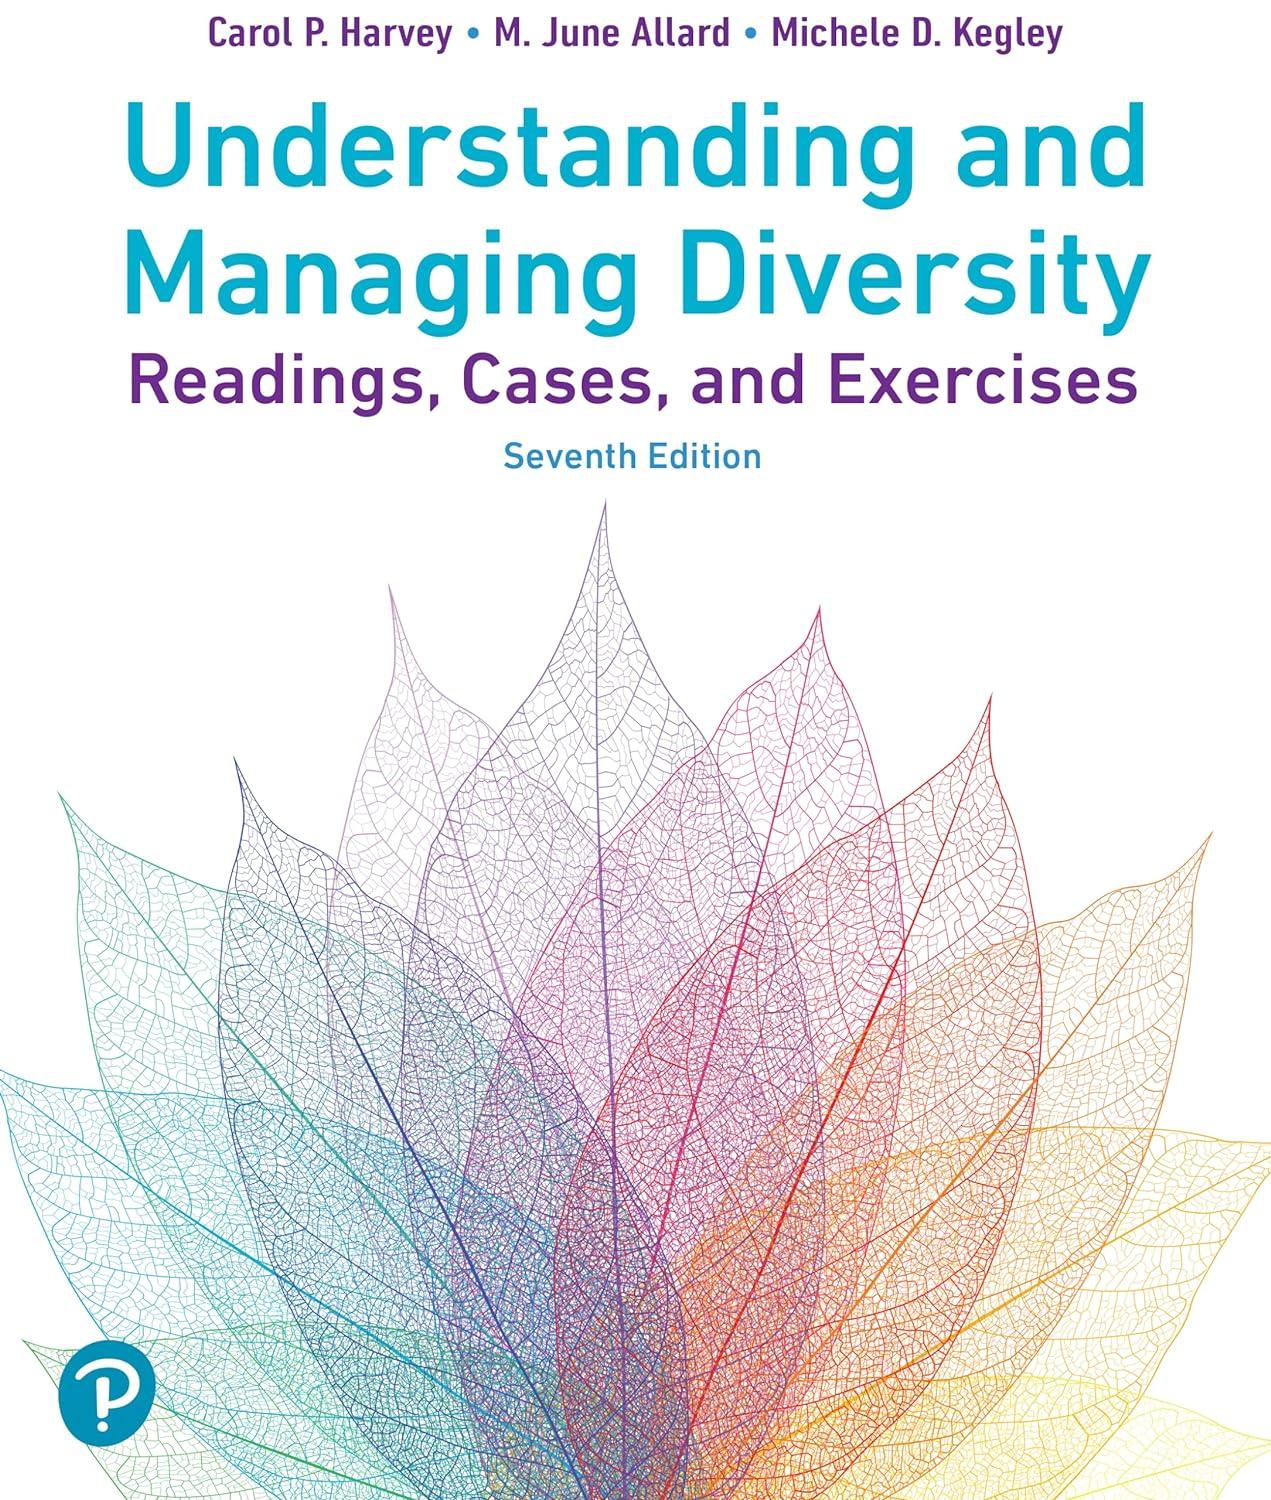 understanding and managing diversity readings cases and exercises 7th edition carol p. harvey, m. june